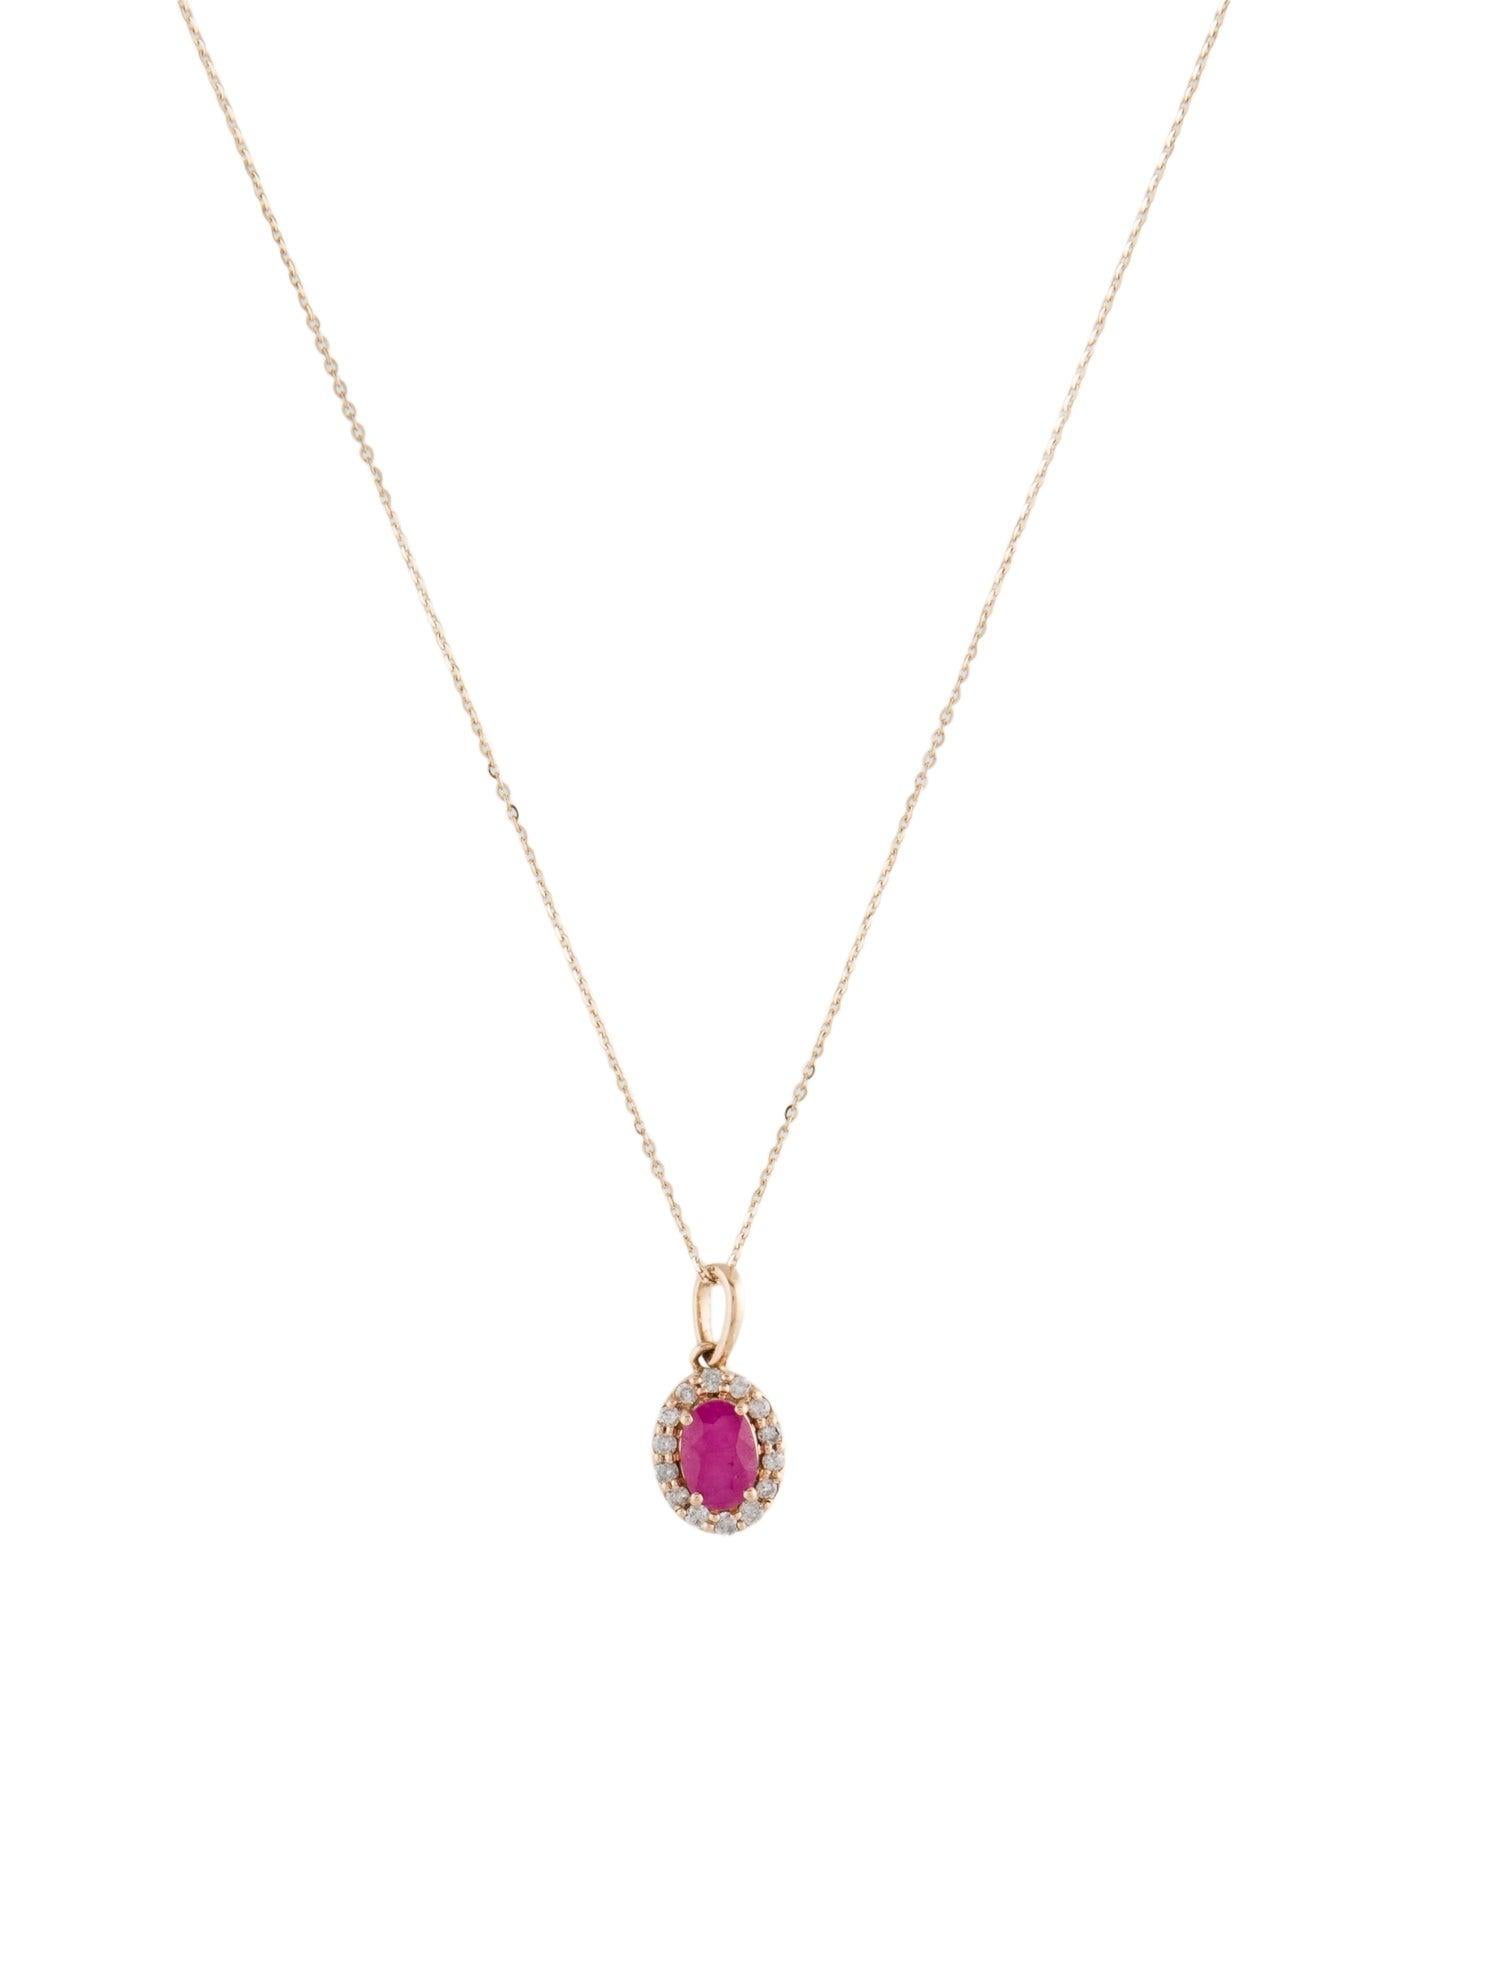 14K Ruby & Diamond Pendant Necklace - Stunning Gemstone Statement Piece In New Condition For Sale In Holtsville, NY